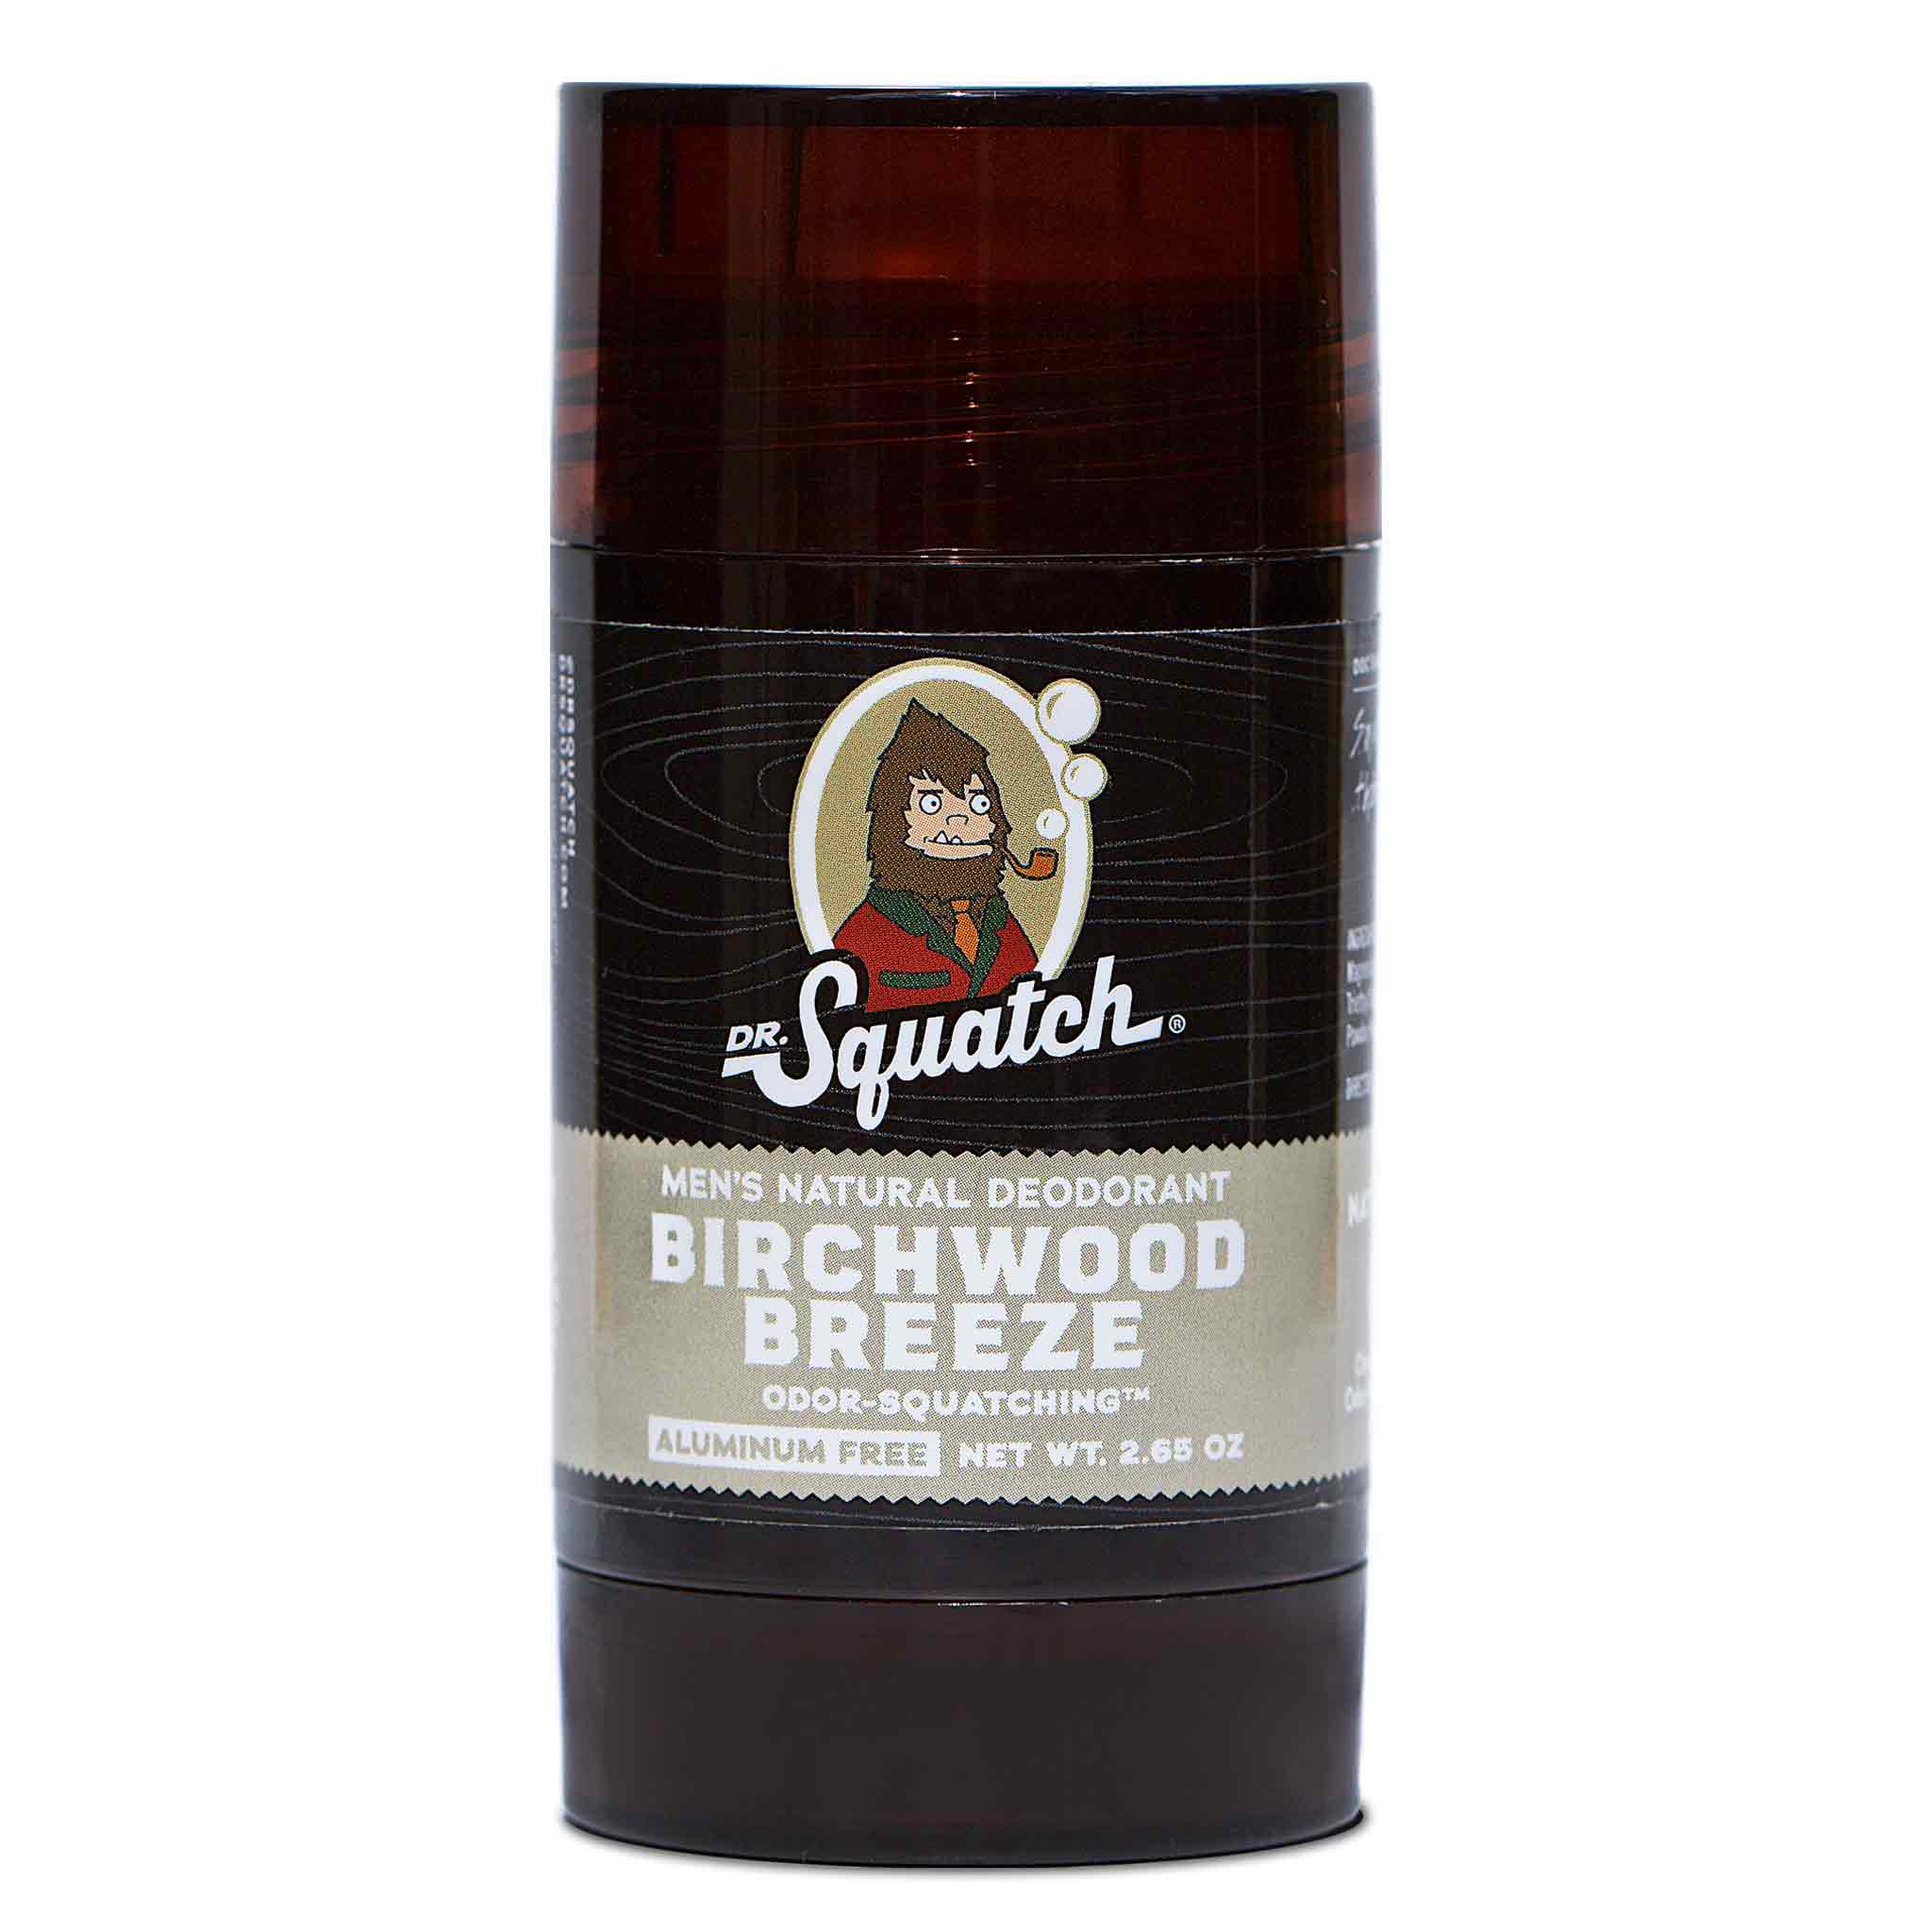 Dr. Squatch - Birchwood Breeze Natural Deodorant I The Kings of